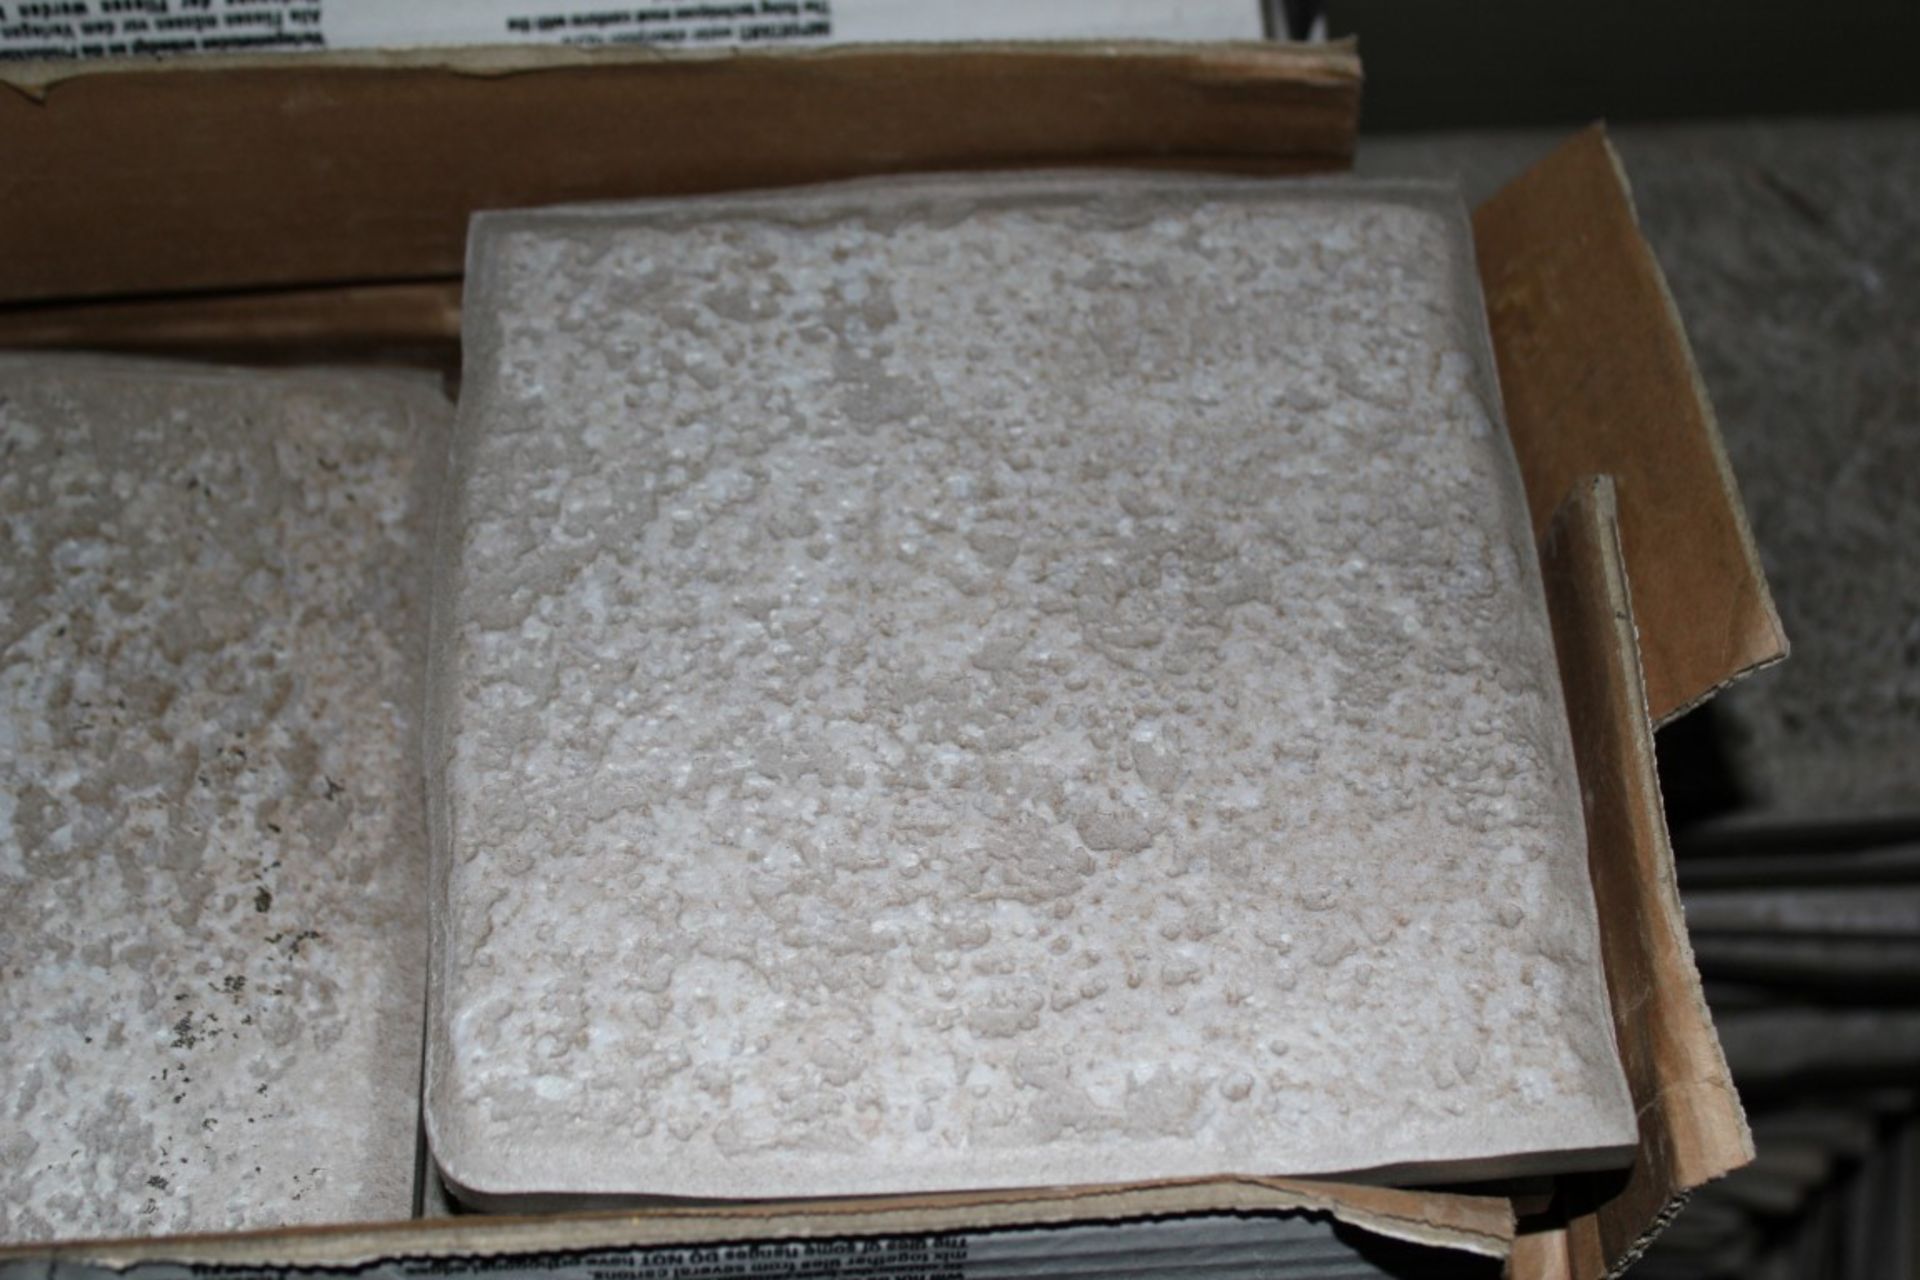 16 x Boxes of Rex Ceramiche Artistiche Wall Tiles - Lot Includes 16 Boxes of 40 Tiles - Tile Size - Image 5 of 7